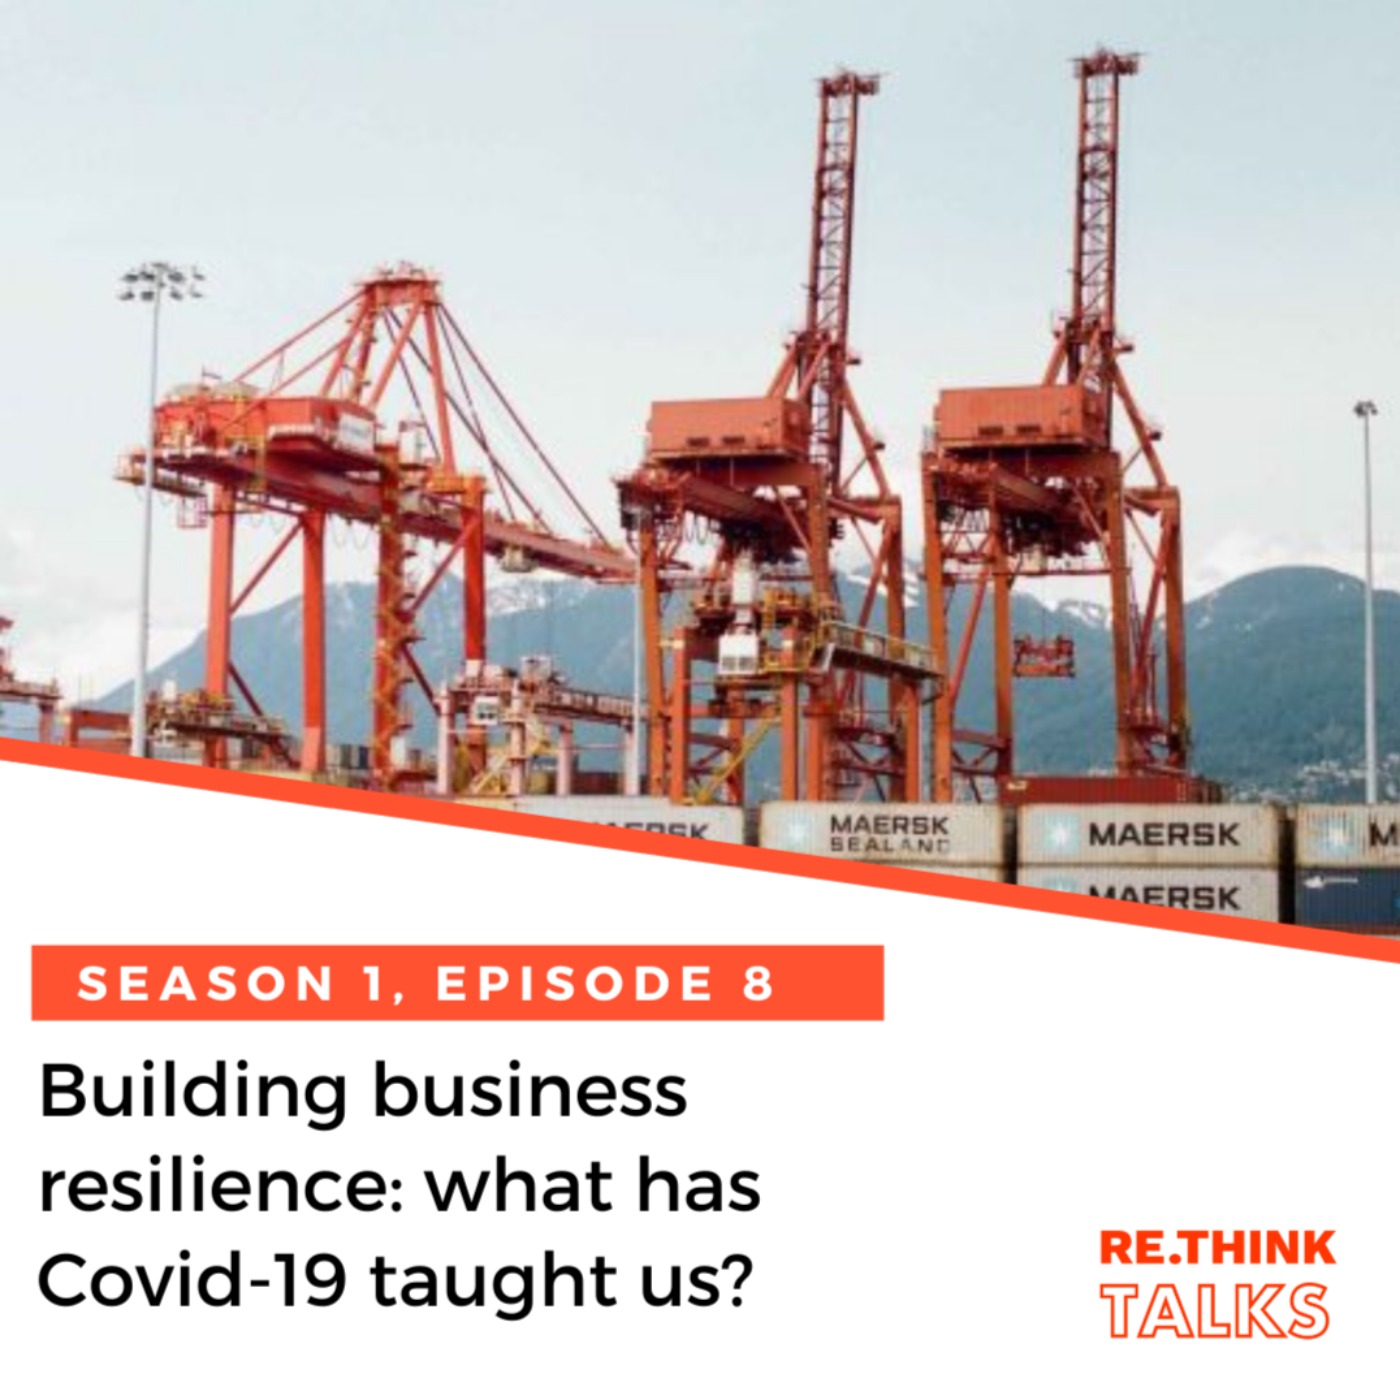 Building business resilience: what has Covid-19 taught us?